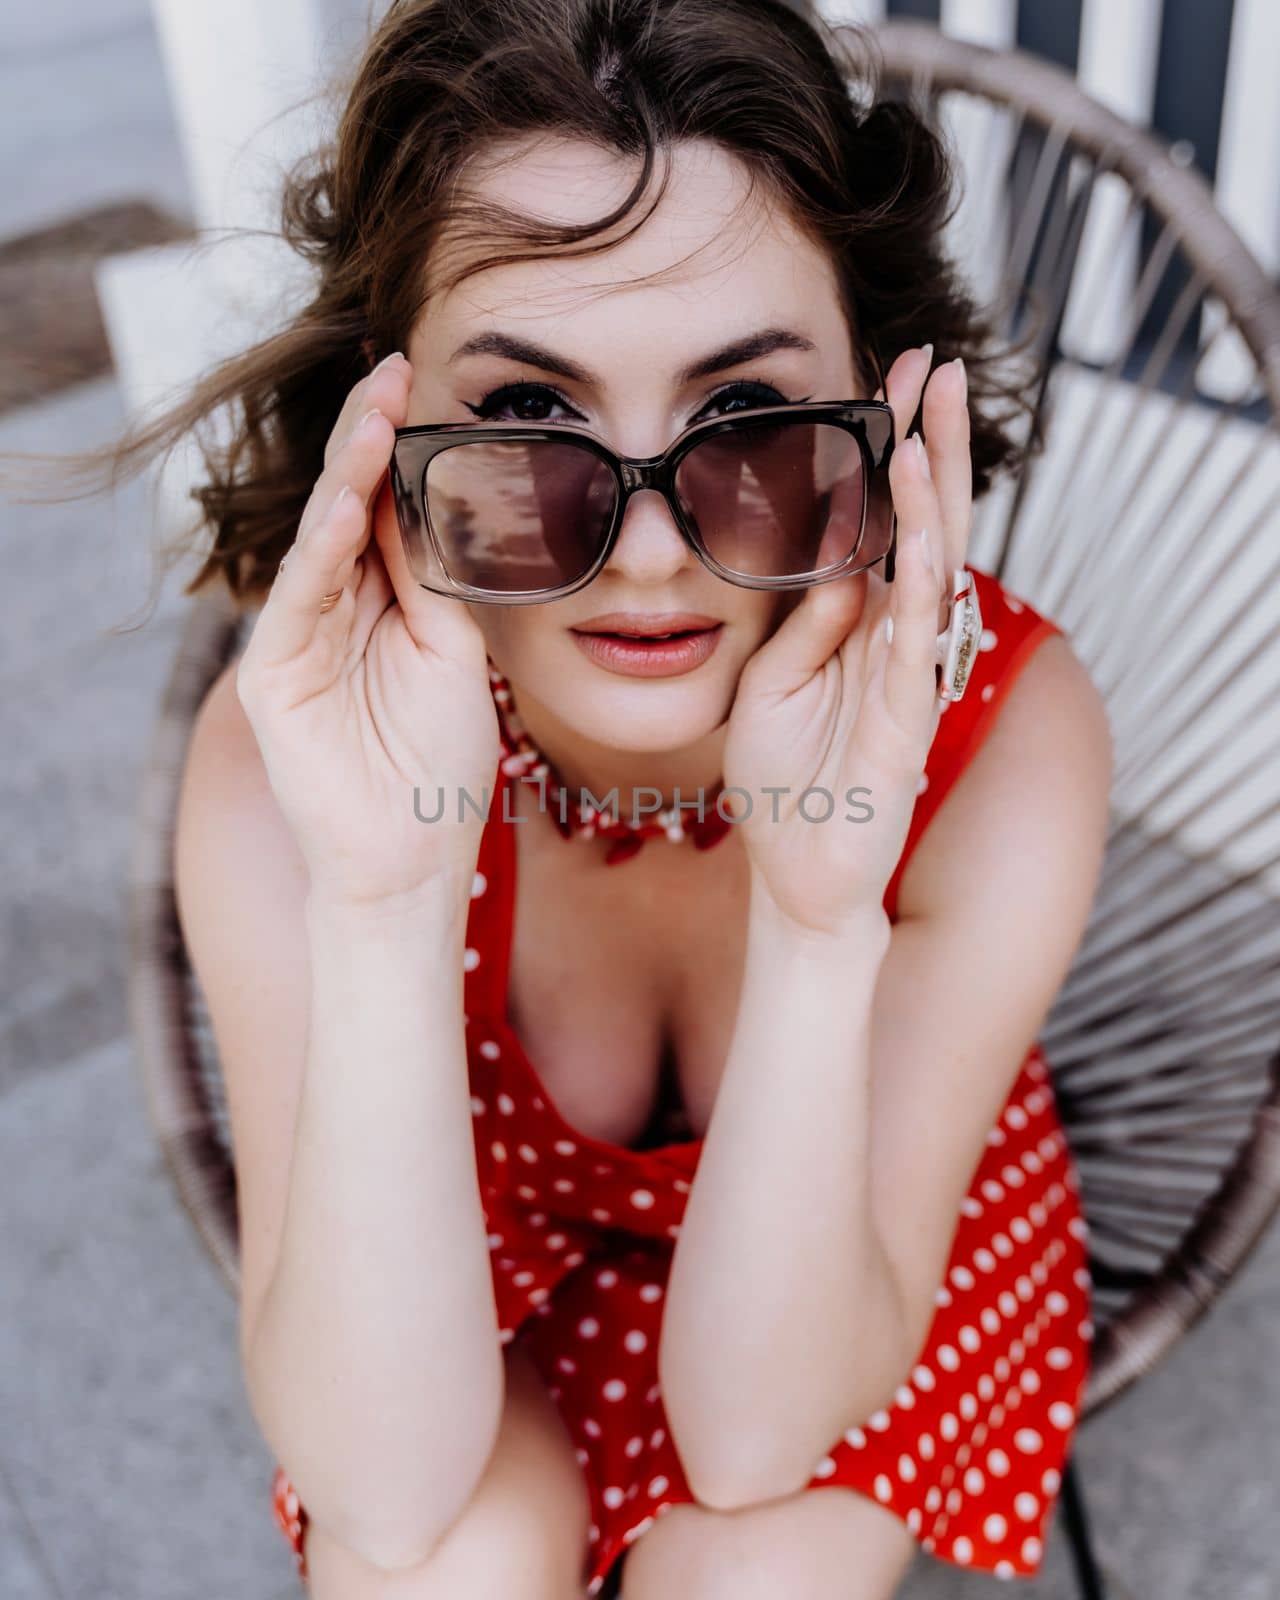 Close-up portrait of a woman with glasses. Photo of a fashionable girl with beautiful brown hair smiling at the camera. by Matiunina